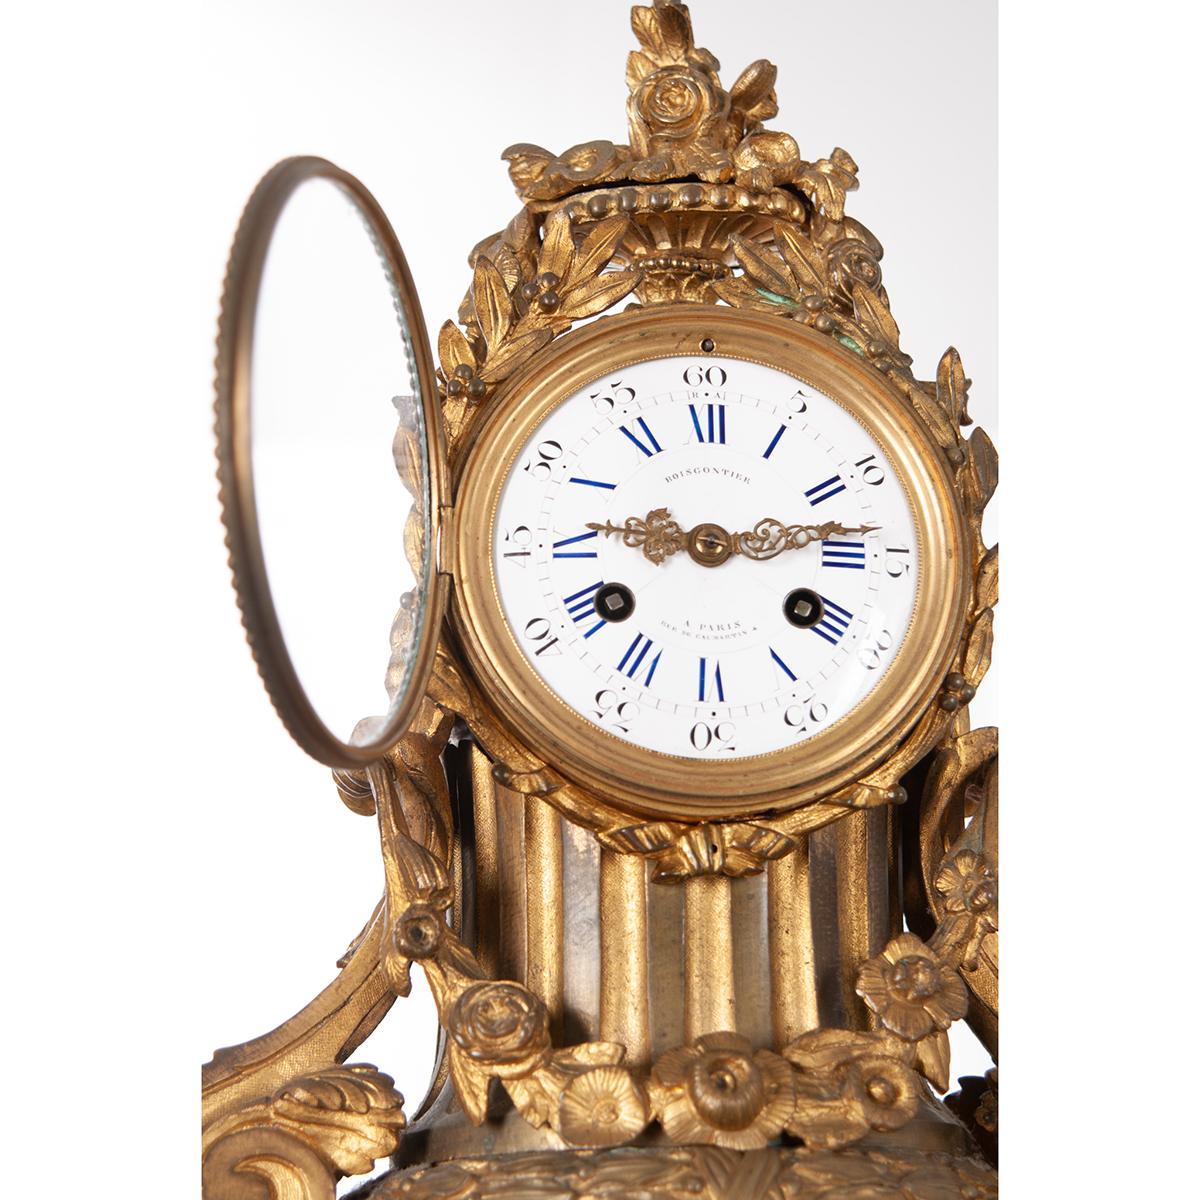 French metal mantle clock with ‘Boiscontier a Paris Rue De Caumartin’ printed on its face. The crest is a basket with elaborate foliate motif over a symmetrically shaped case. The key operates the clock’s working movement through two key holes found